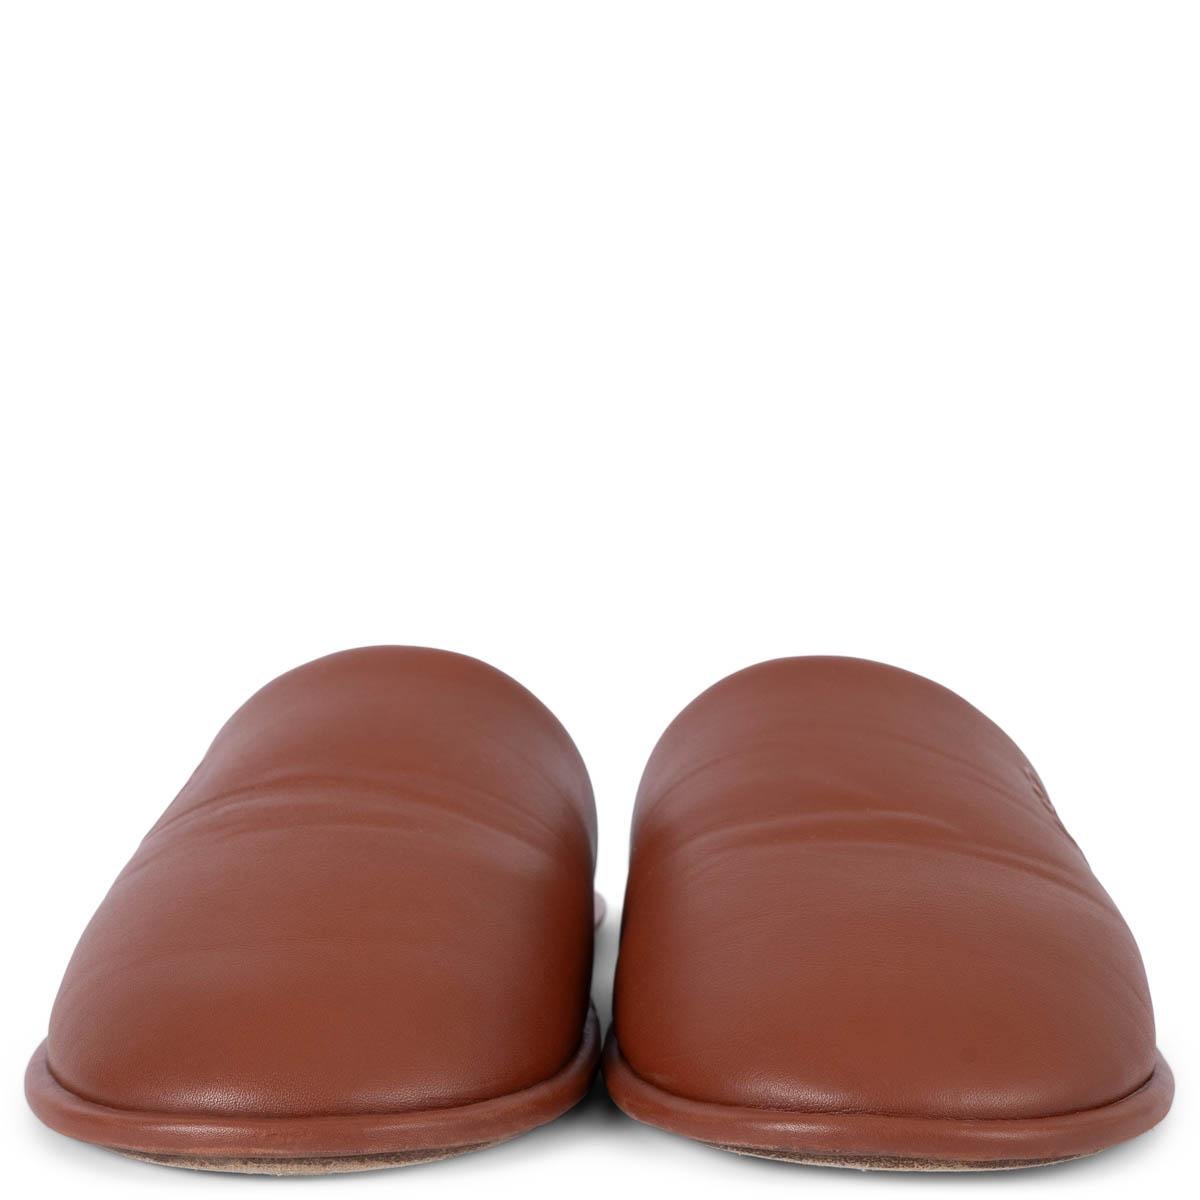 100% authentic LOEWE slippers in tan smooth leather embossed with the 'Anagram' logo and set on comfortable cushioned soles. The sleek design features round toes. Have been worn and are in excellent condition. 

Measurements
Imprinted Size	39 (run